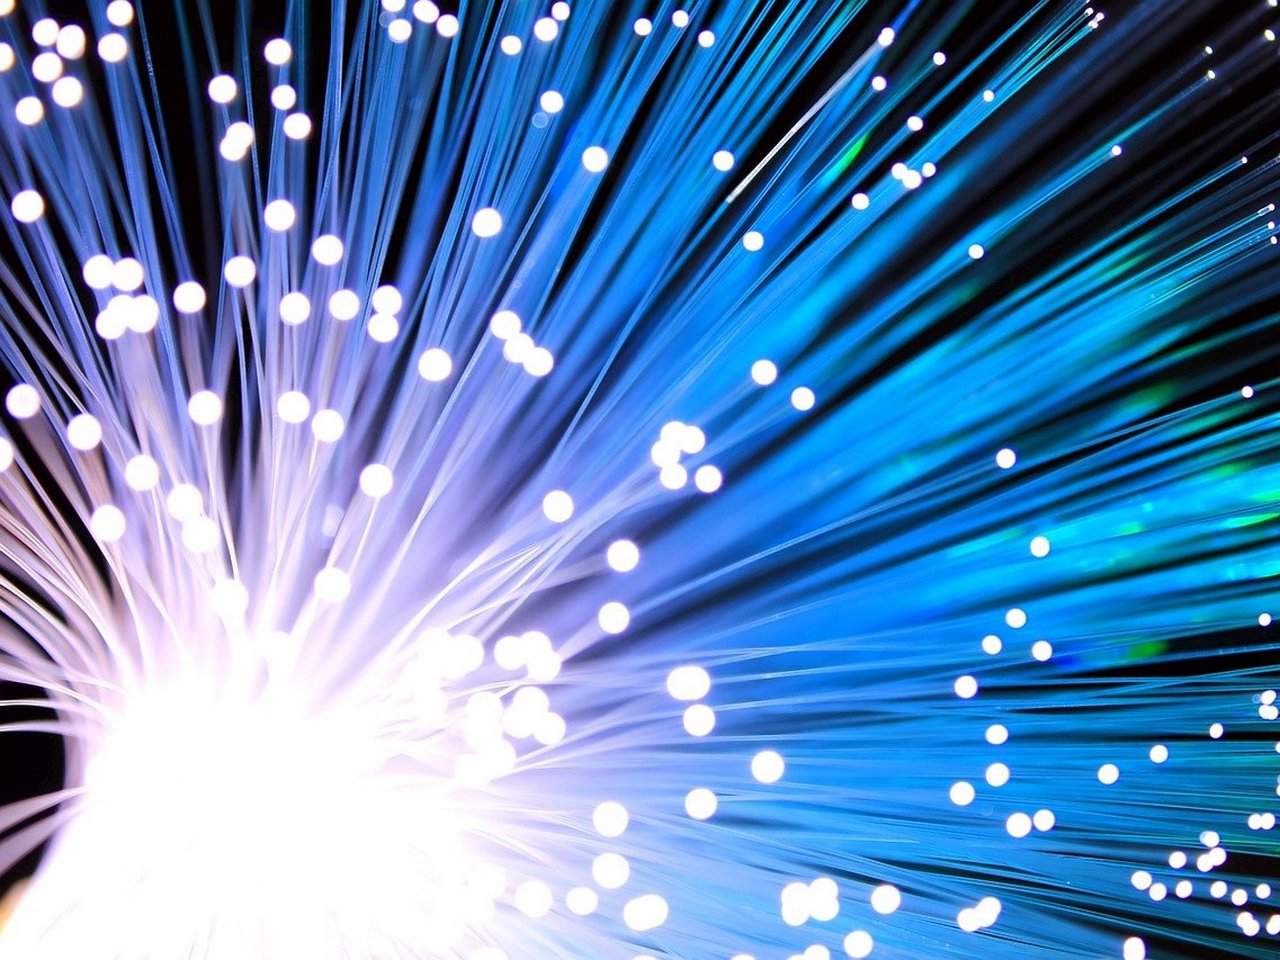 Nokia has boosted fiber-optic Internet to 600 Gbit/s